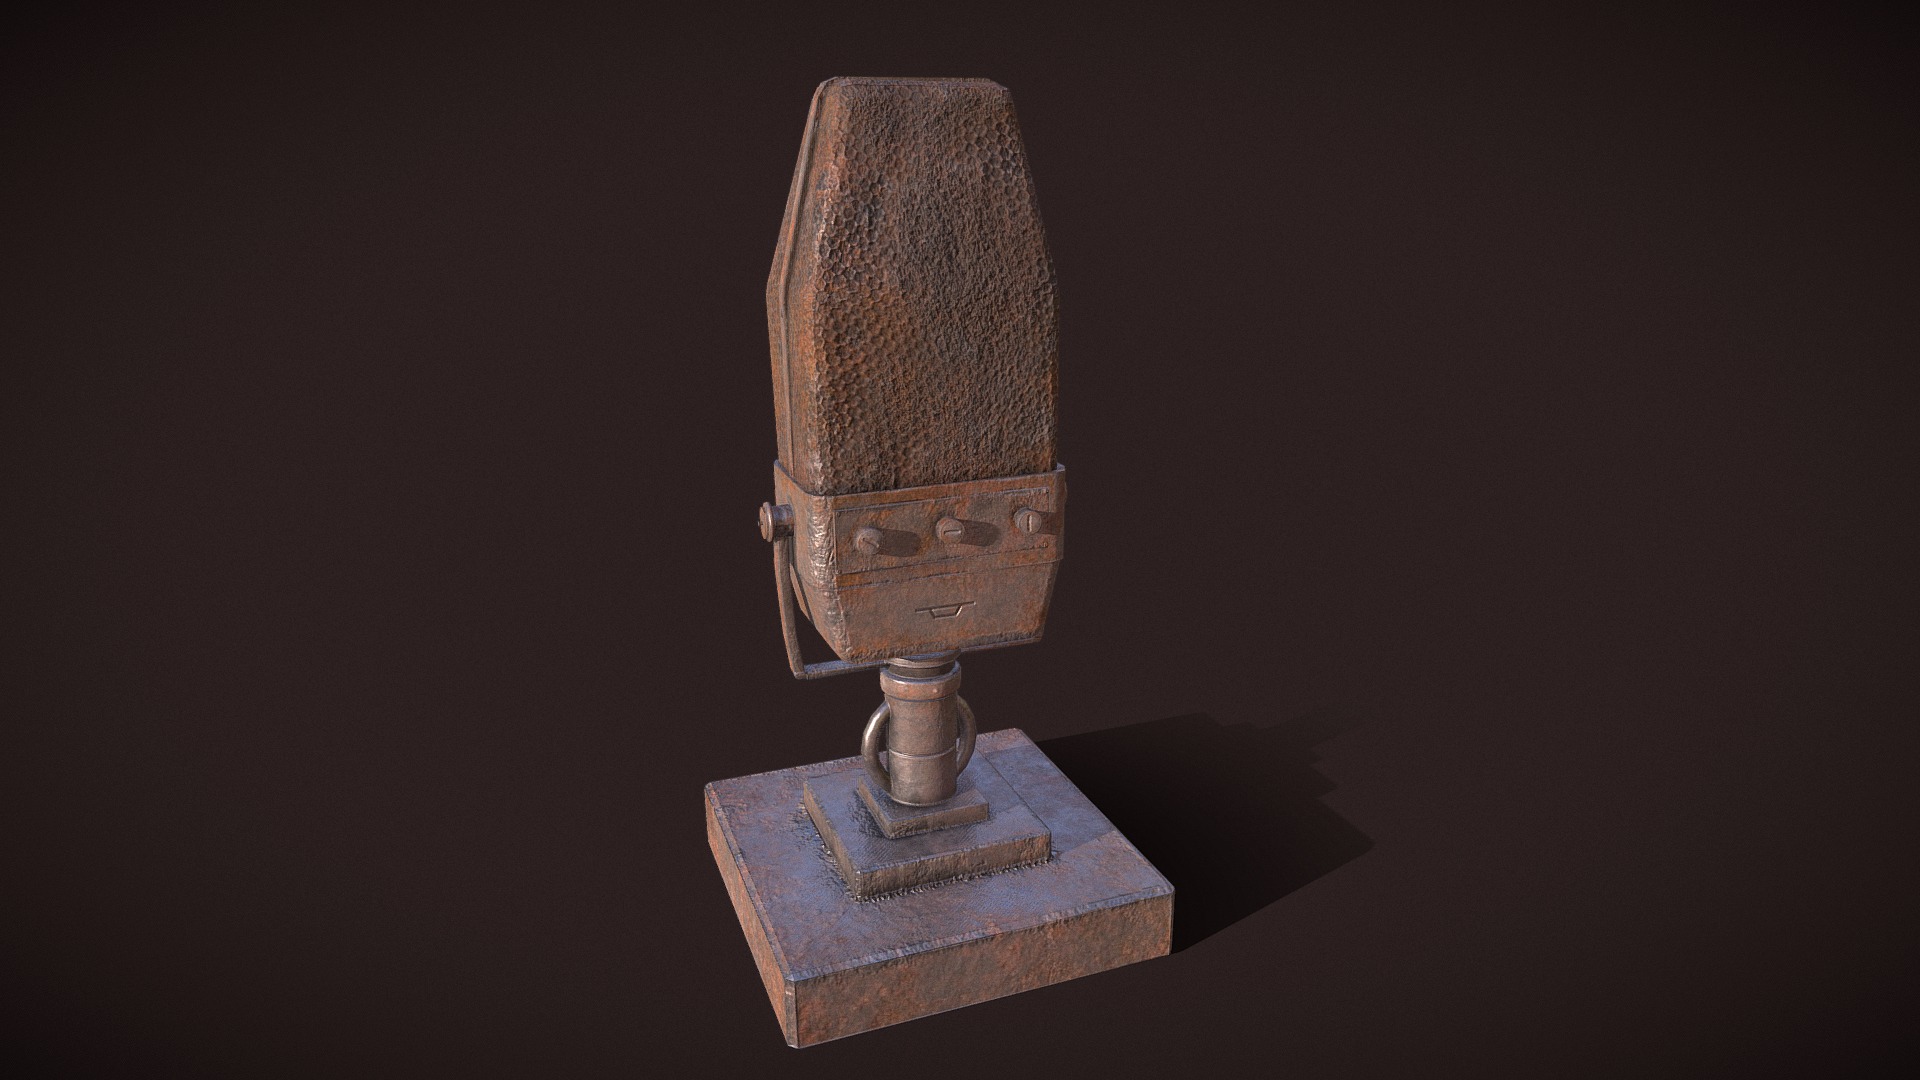 3D model Vintage Microphone - This is a 3D model of the Vintage Microphone. The 3D model is about a metal object with a metal object on top.